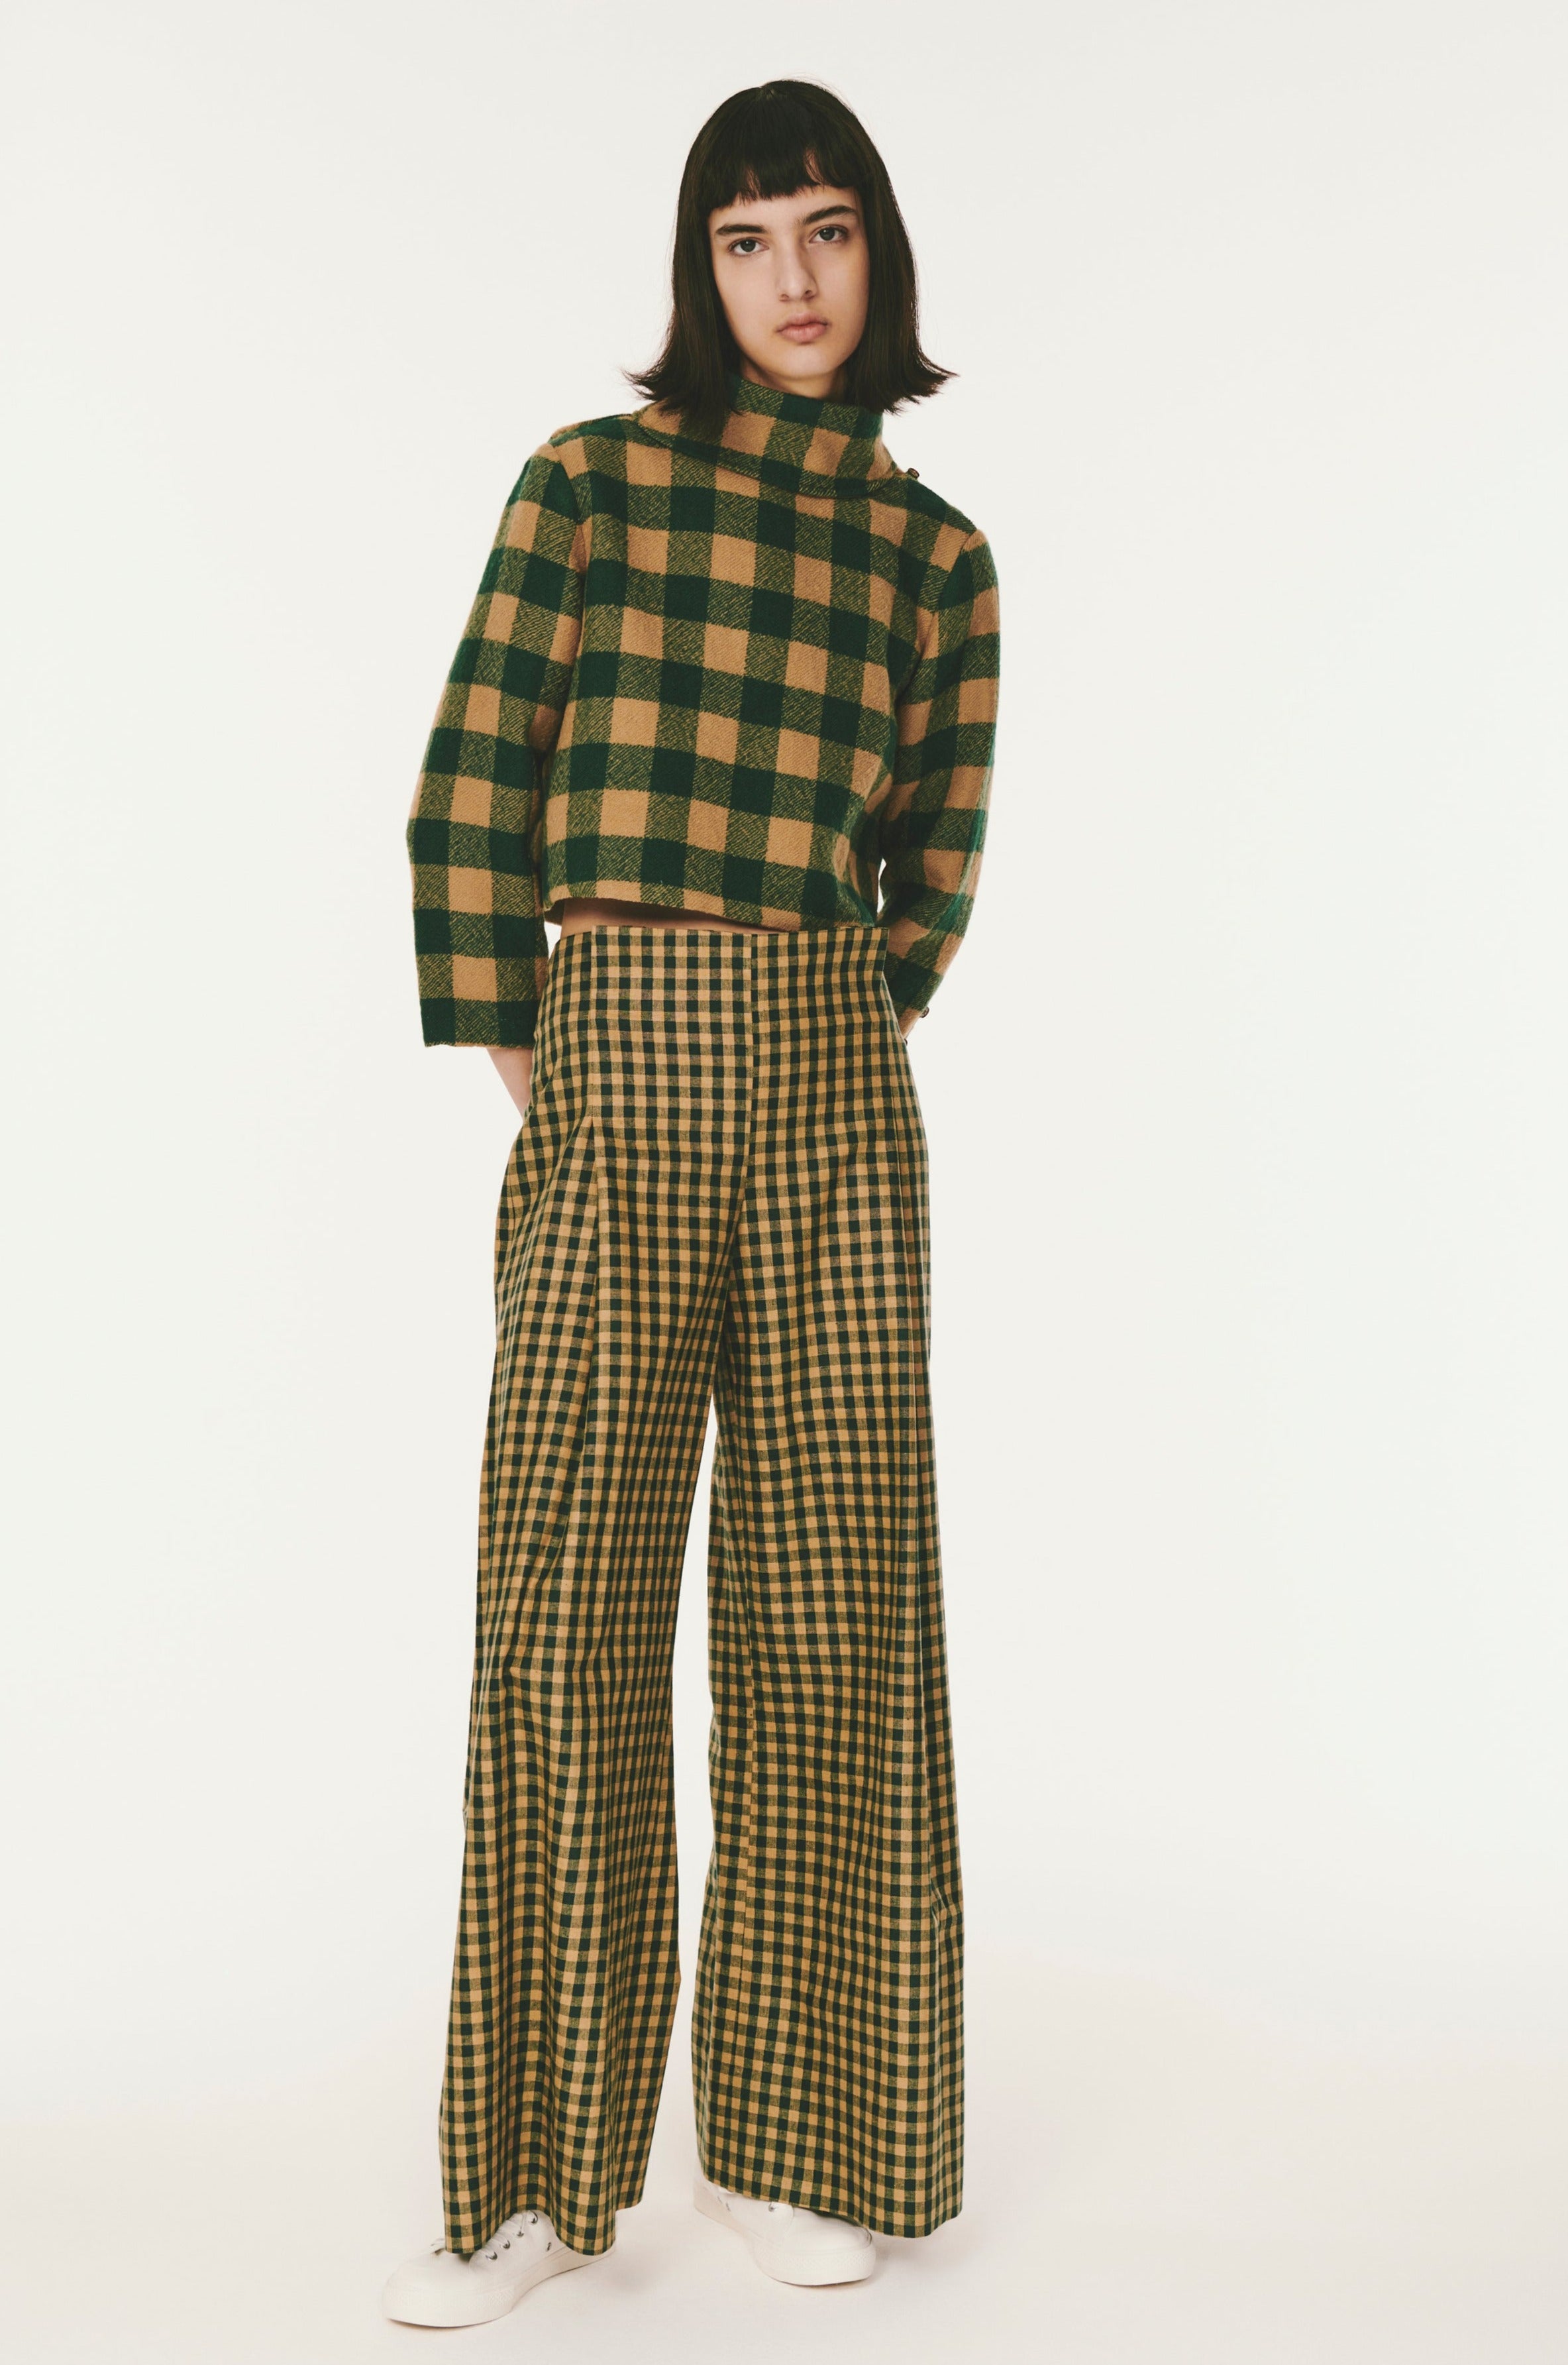 Vintage Yellow Plaid Drawstring Sweatpants For Women Loose Fit, Wide Leg,  Casual Checked Trousers Women For Spring And Summer 201109 From Mu04,  $21.37 | DHgate.Com